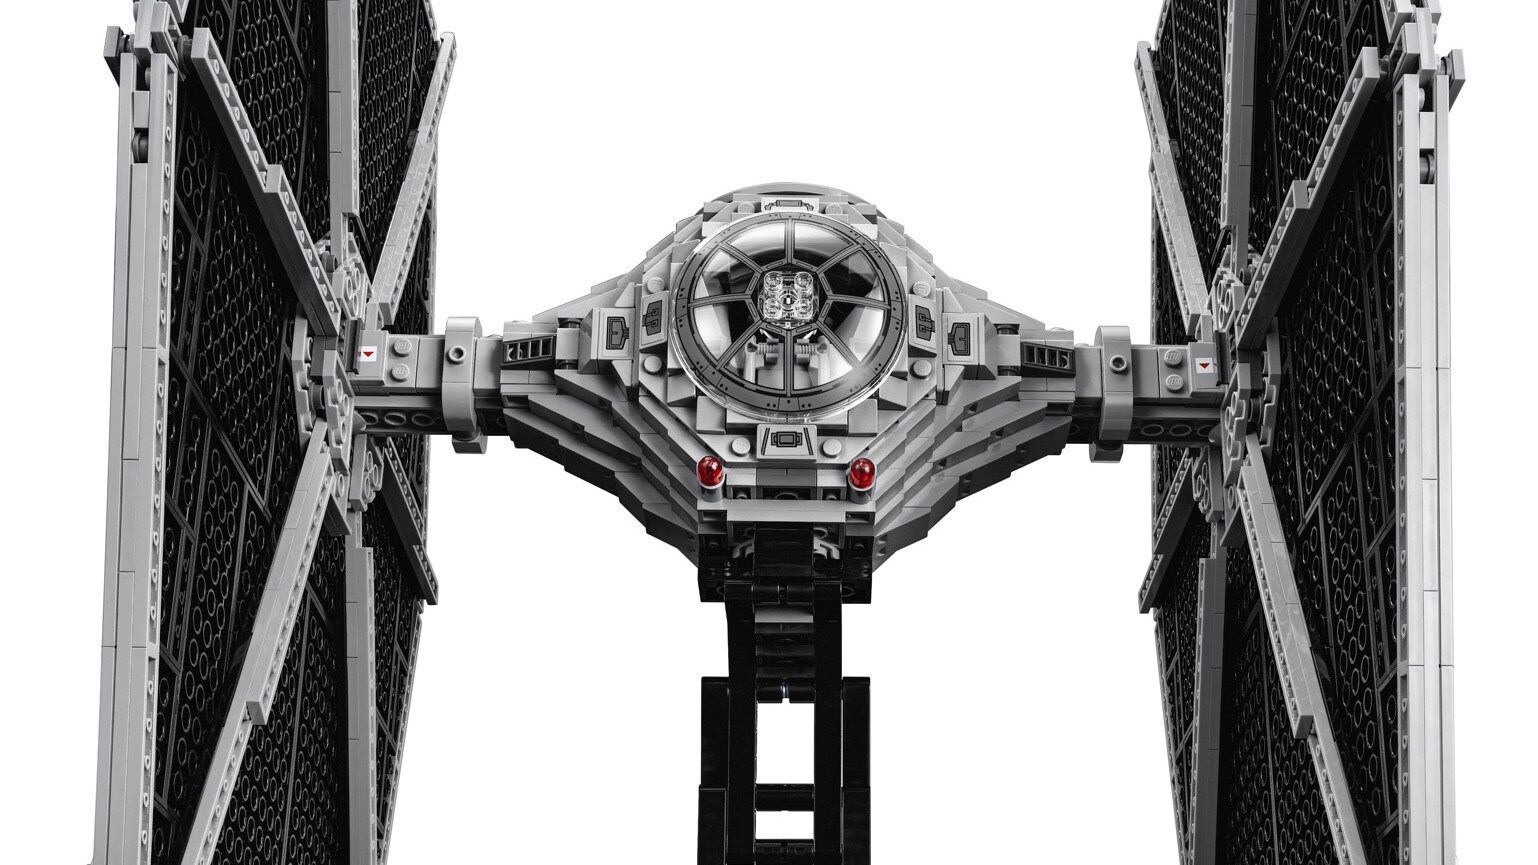 Ultimate Collector Series LEGO TIE Fighter - Exclusive Reveal